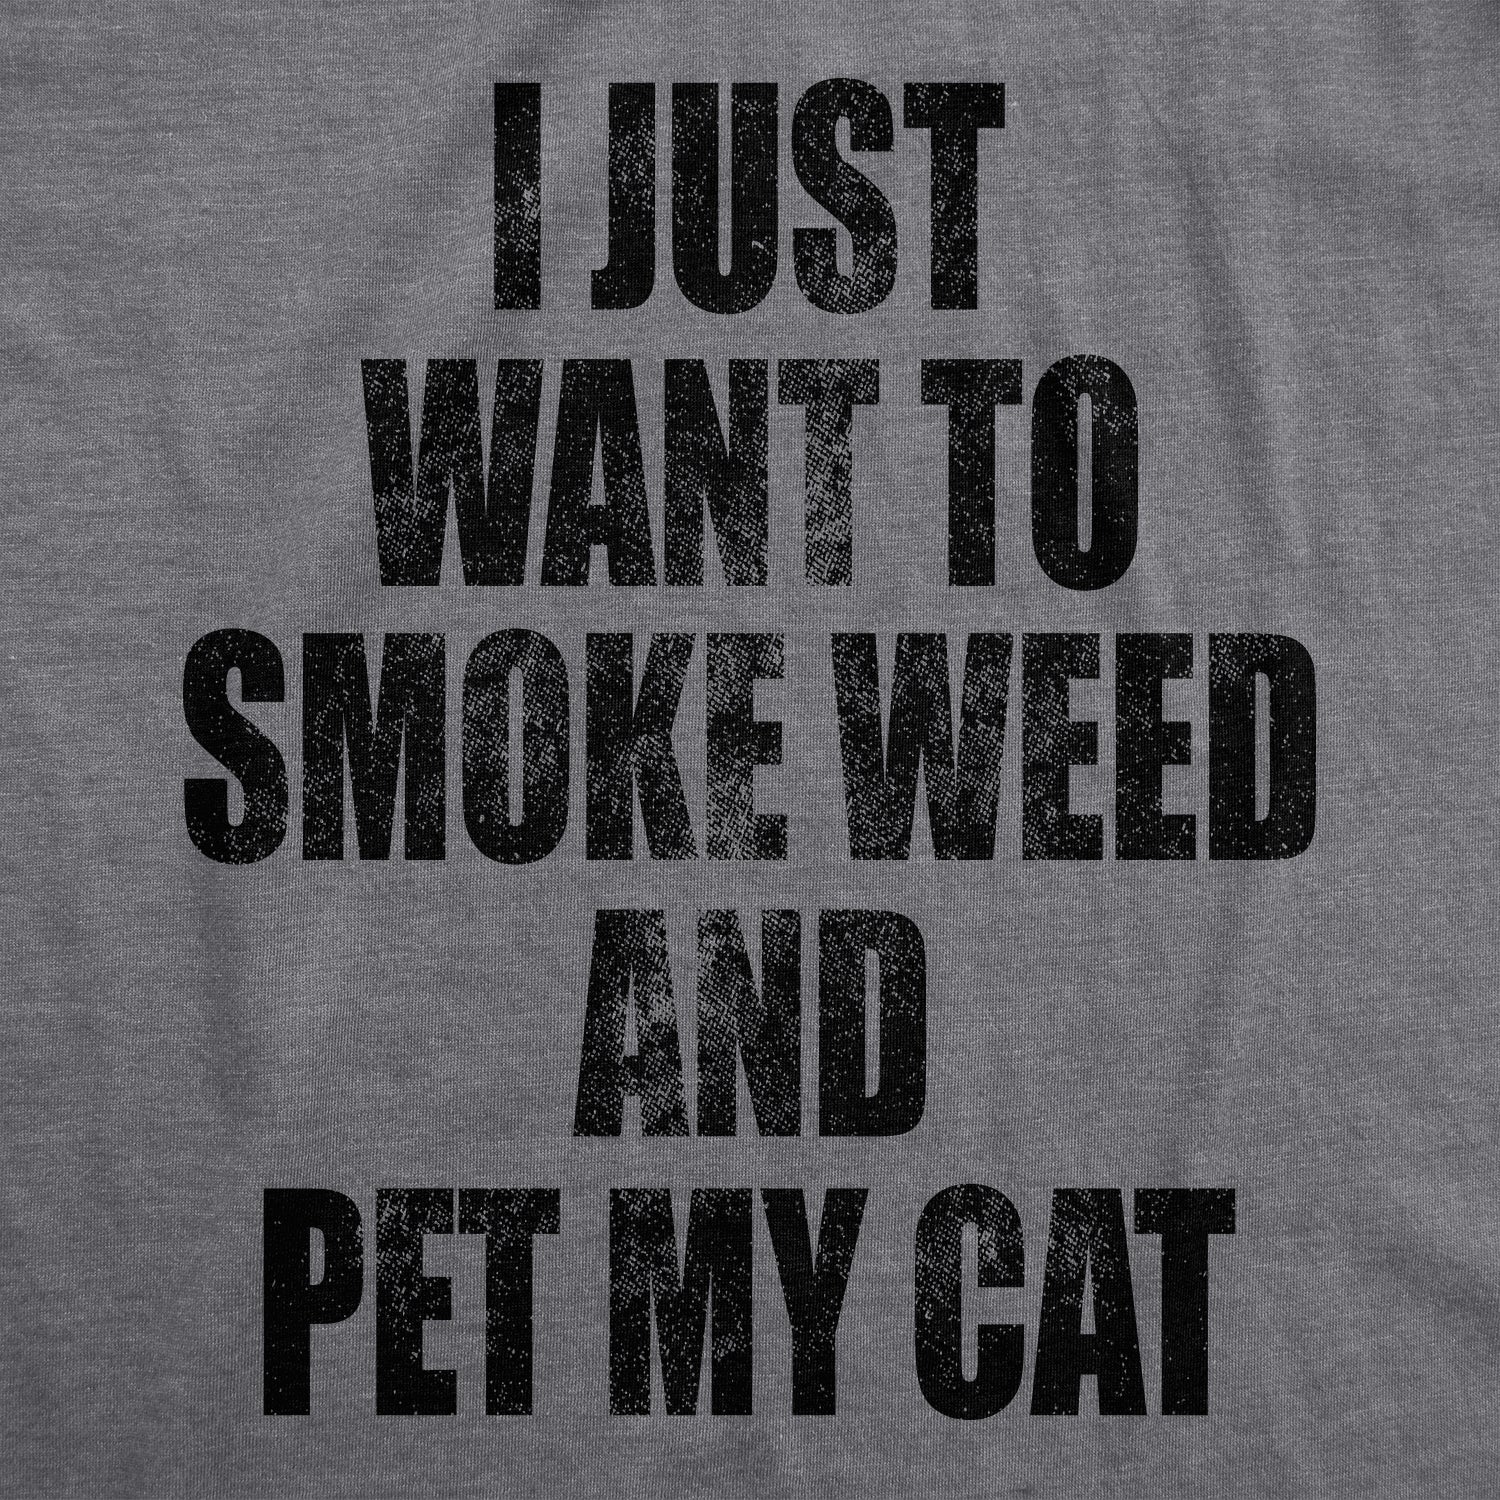 Funny Dark Heather Grey I Just Want To Smoke Weed And Pet My Cat Mens T Shirt Nerdy 420 Cat Tee